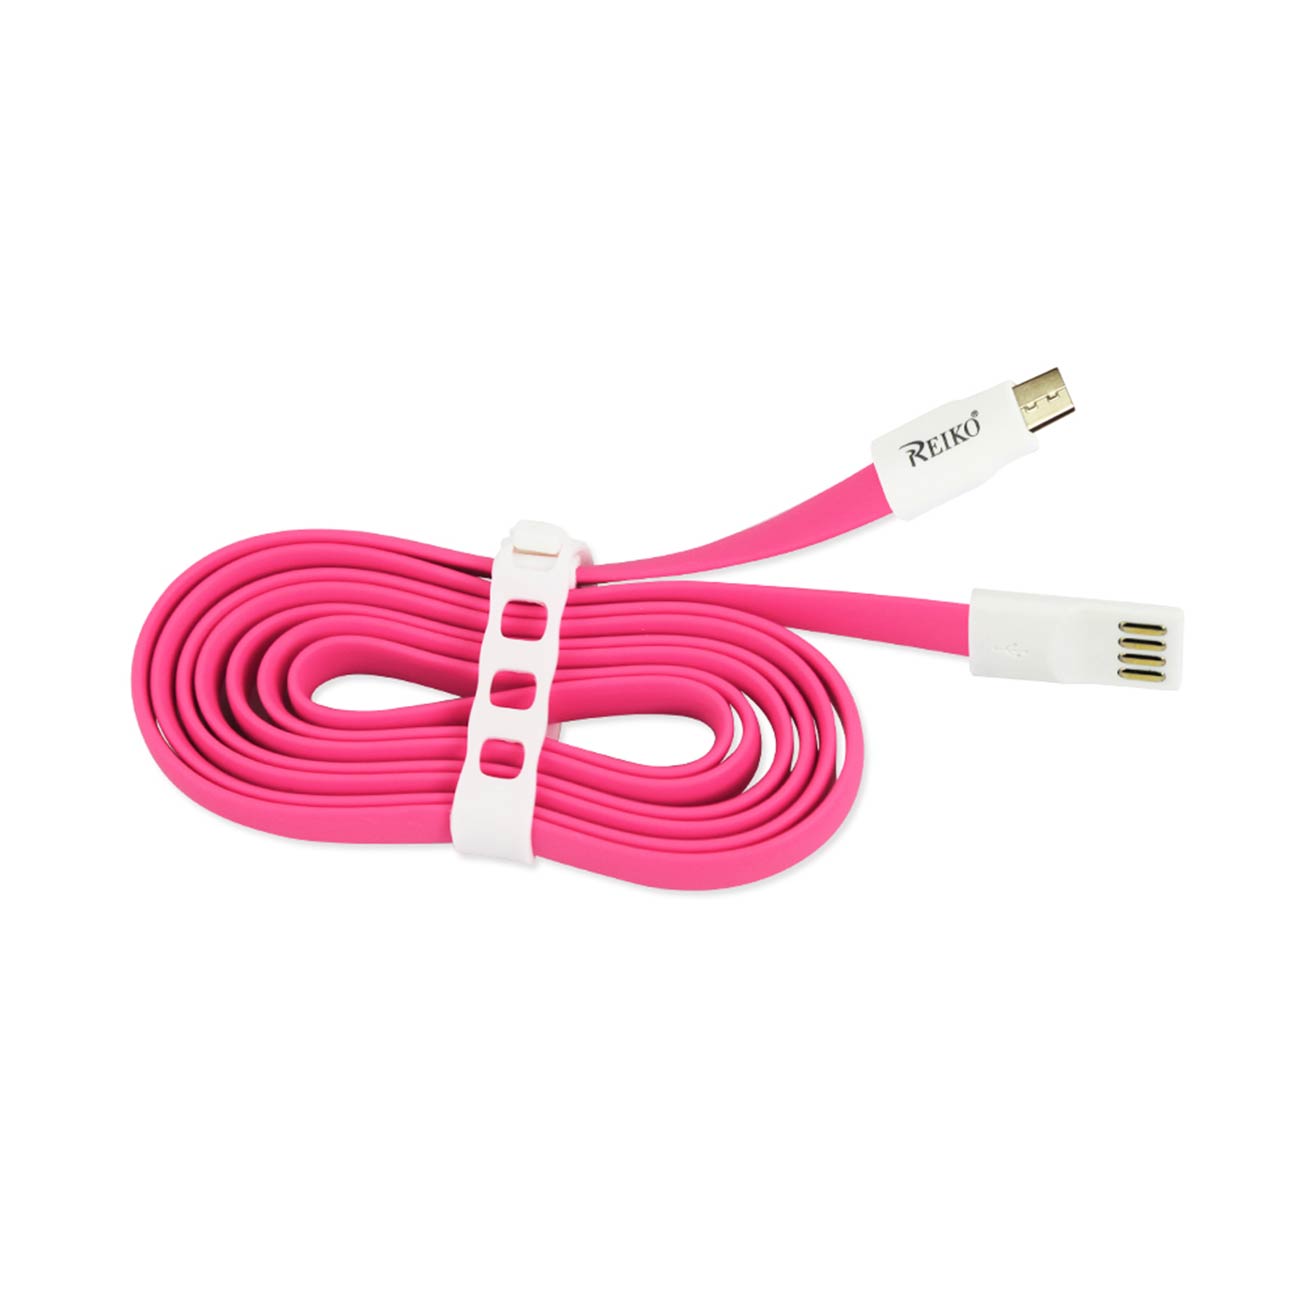 Data Cable USB Flat Micro Gold Plated 3.9Ft With Cable Tie Hot Pink Color